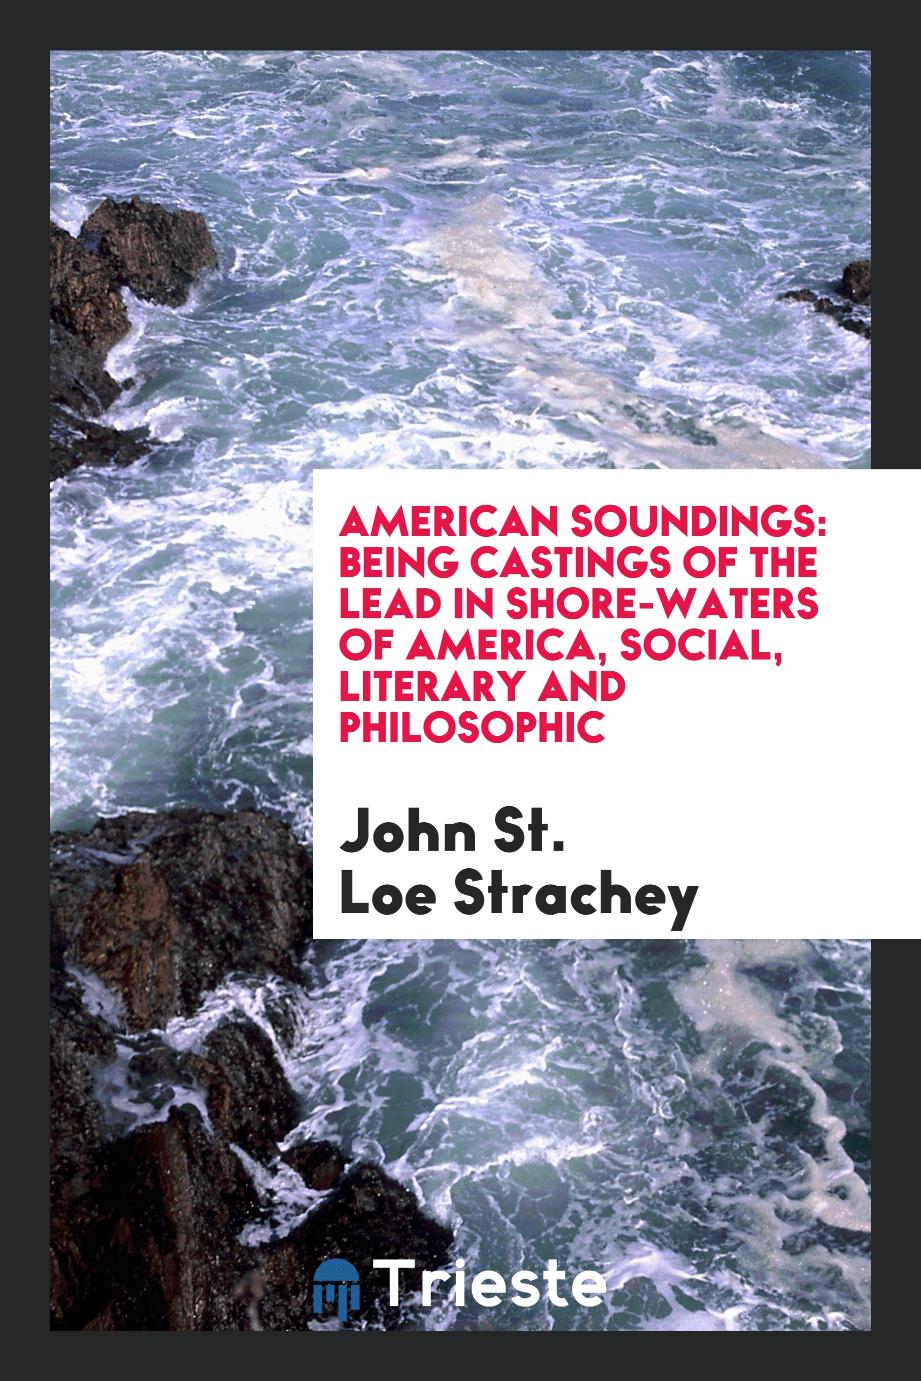 American soundings: being castings of the lead in shore-waters of America, social, literary and philosophic